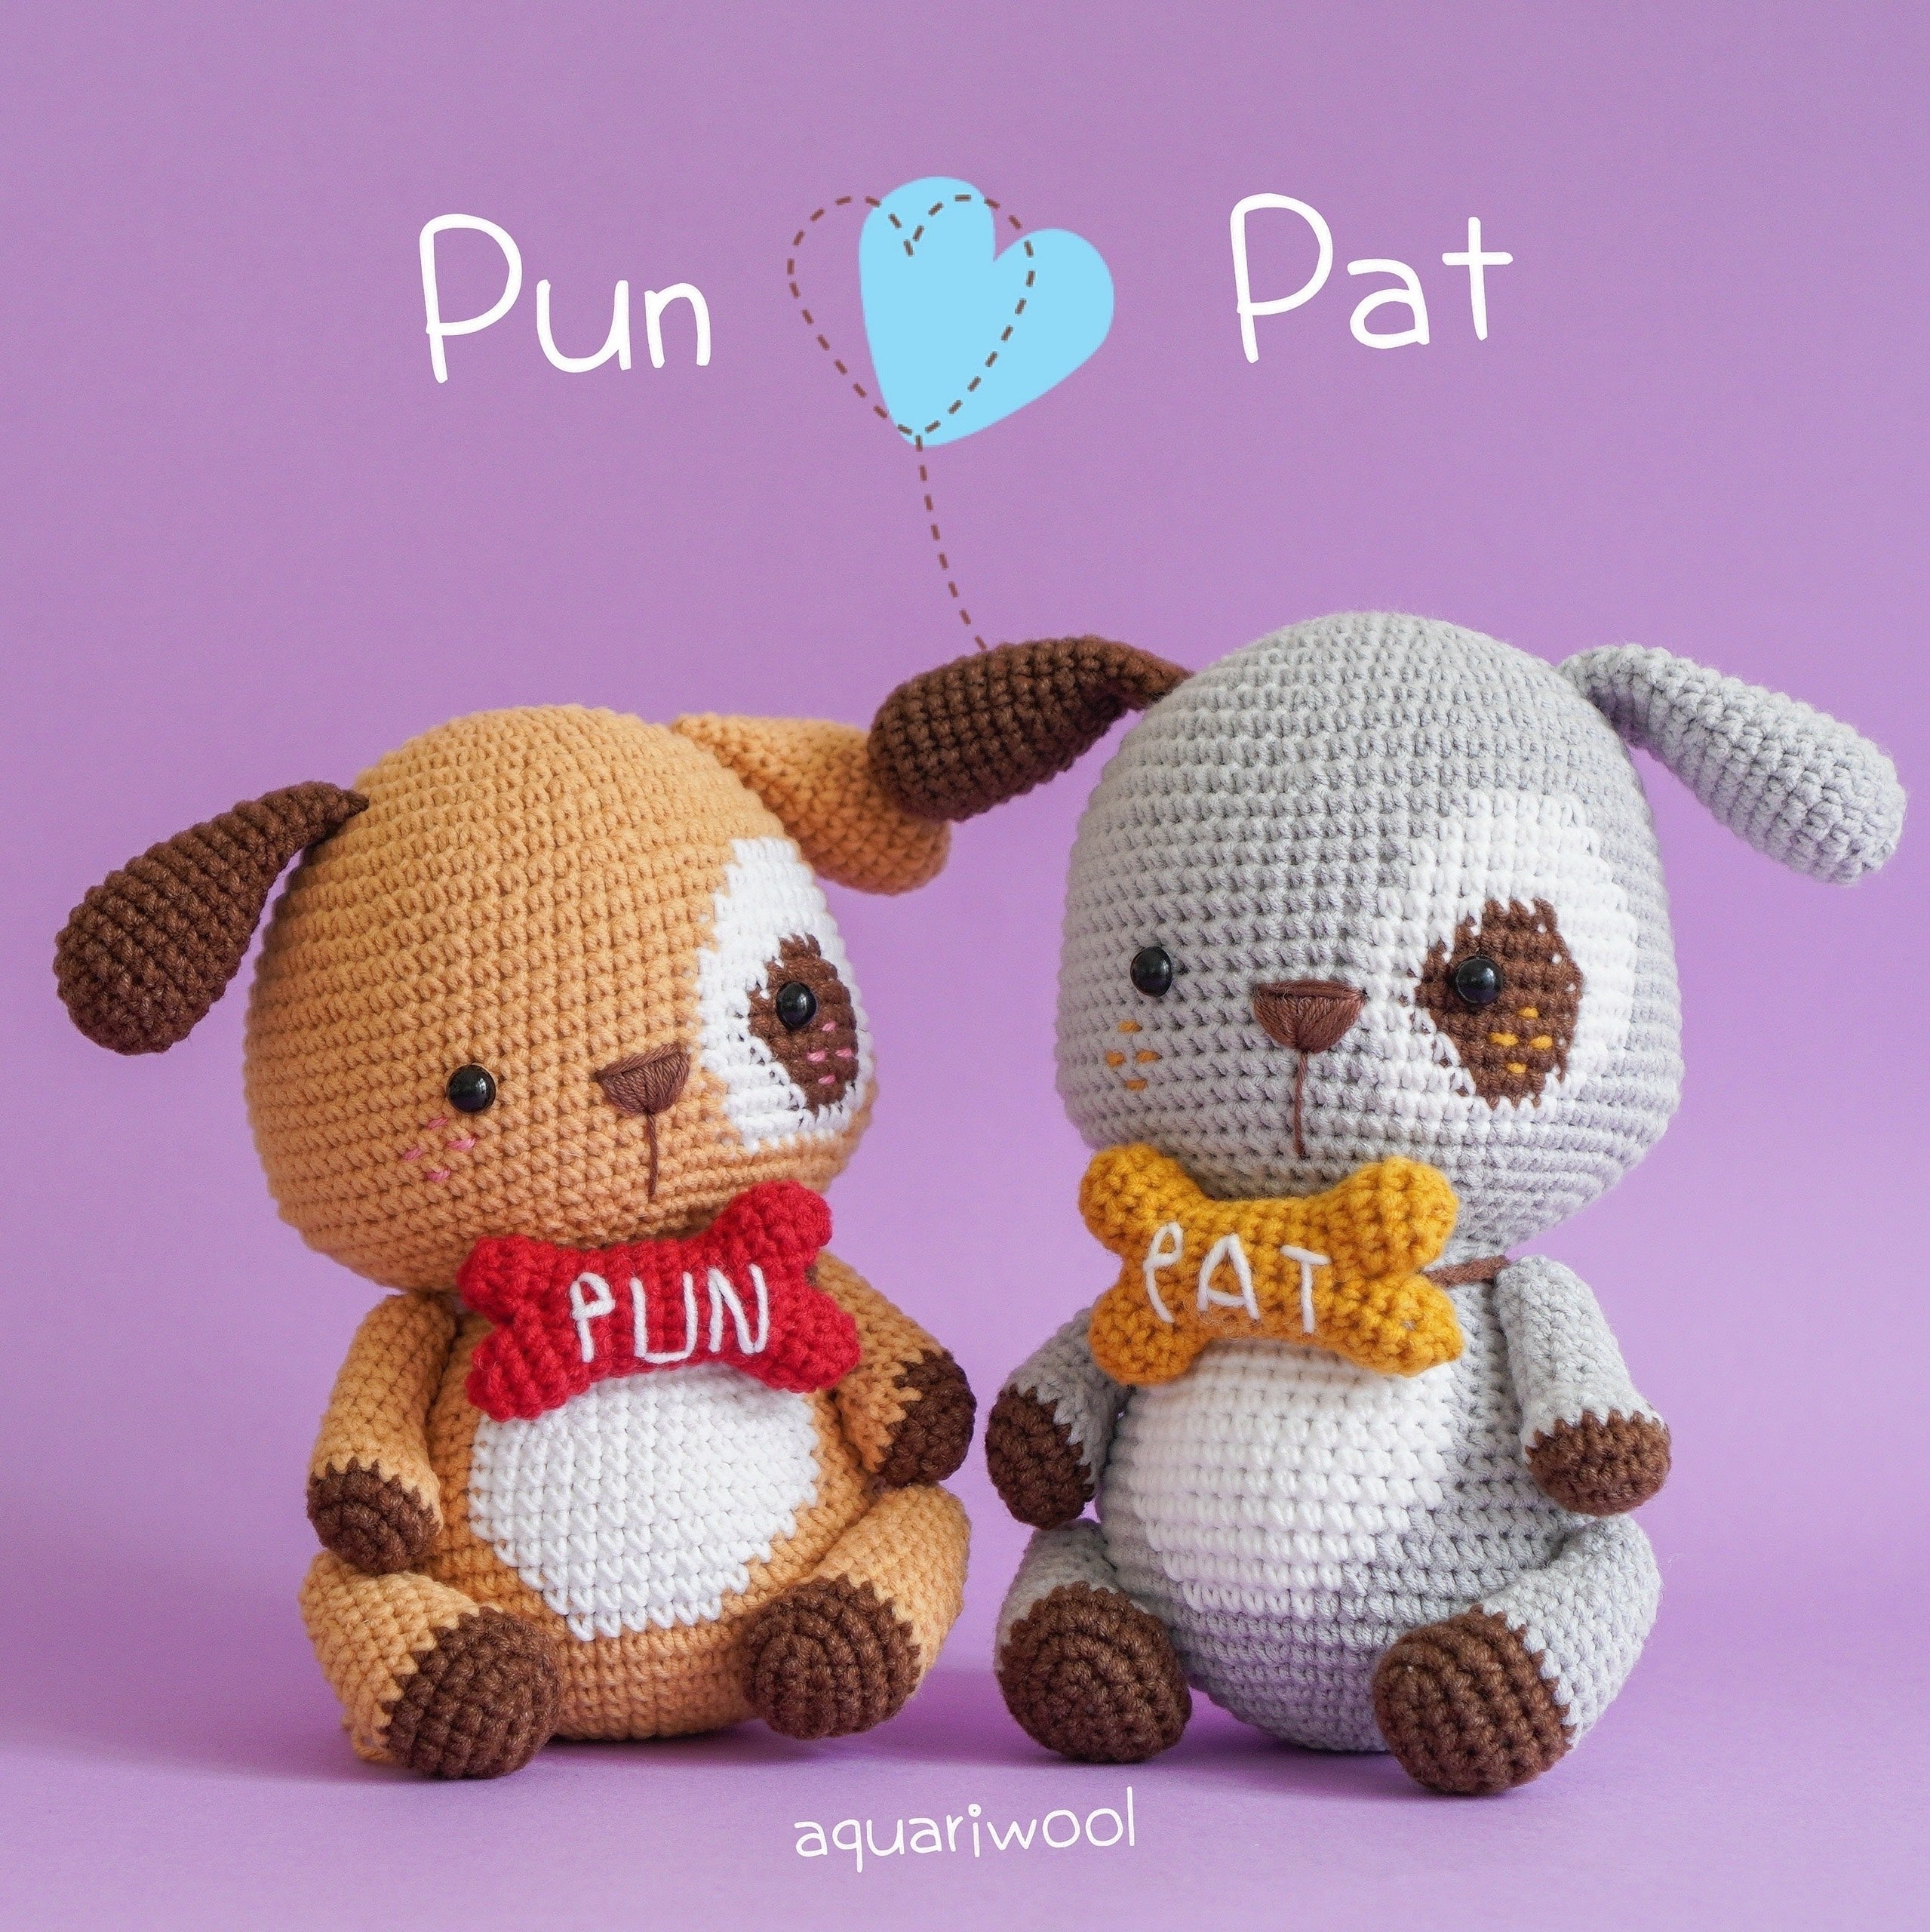 Pat The Puppy Crochet Pattern by Aquariwool Crochet (Crochet Doll Pattern/Amigurumi Pattern for Baby gift)